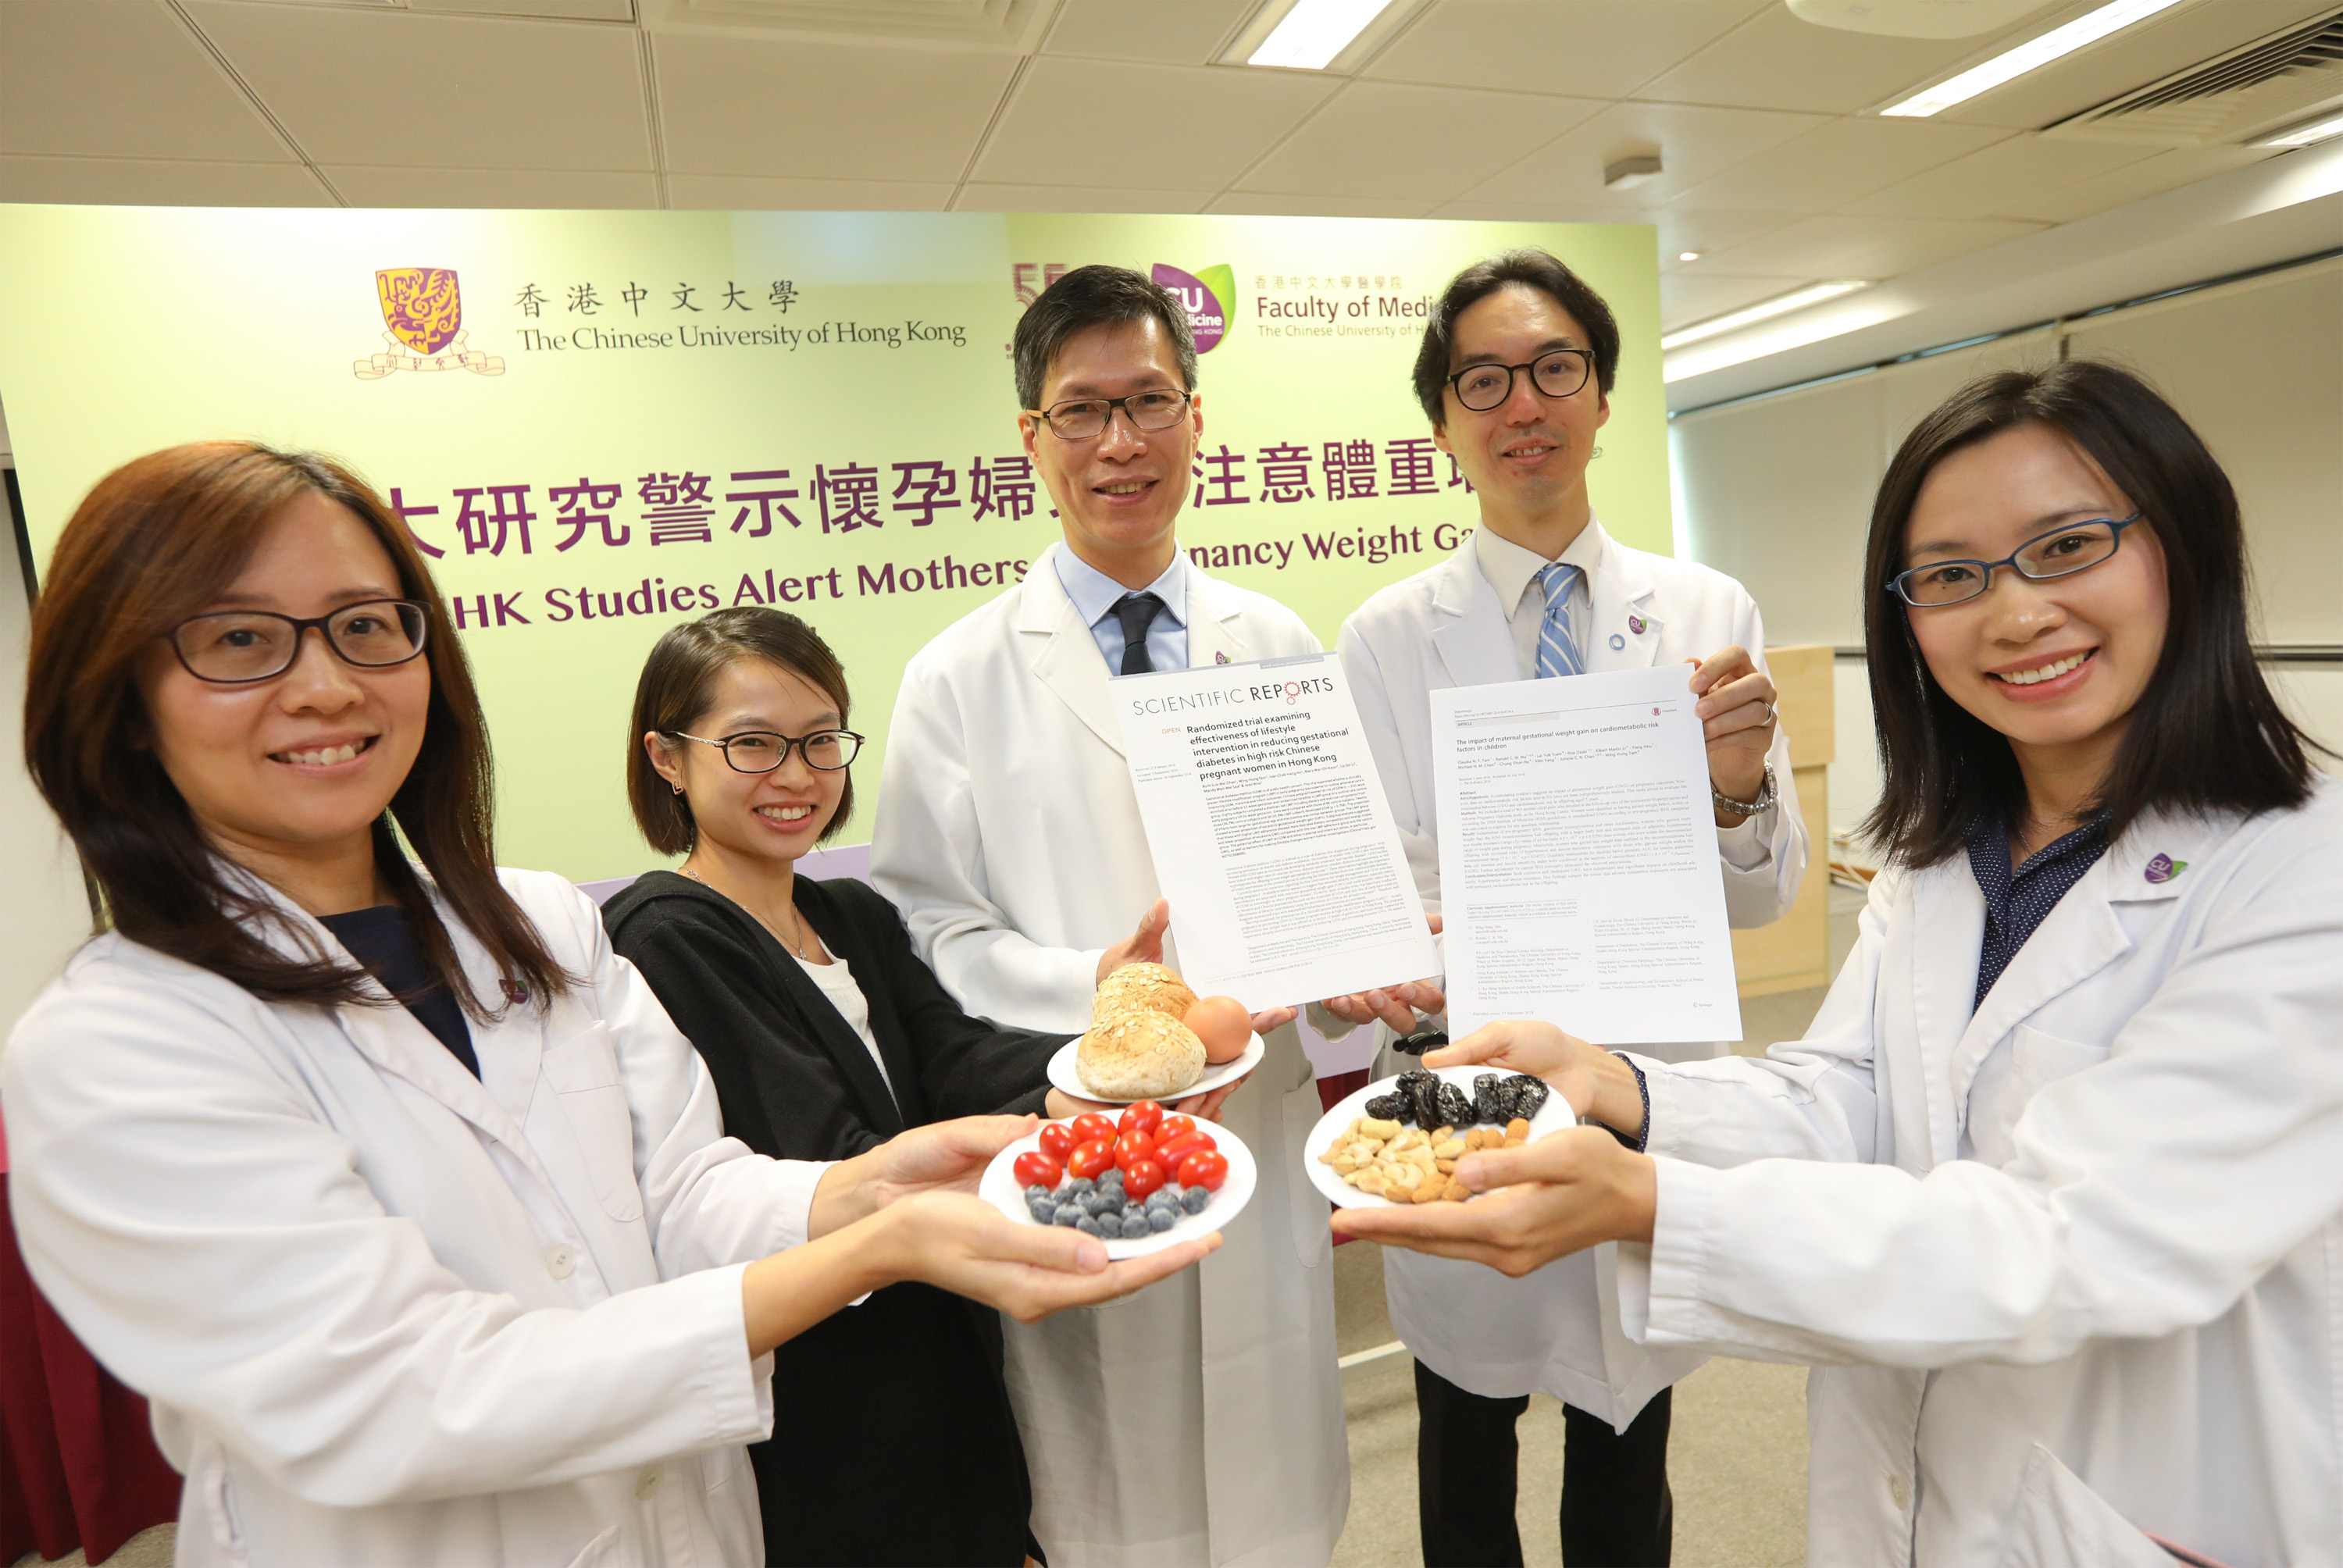 Studies conducted by the Faculty of Medicine at The Chinese University of Hong Kong (CUHK) showed that too much or too little weight gain in pregnancy will lead to cardiometabolic risks in offspring. A Lifestyle Modification Programme has been found effective to achieve optimal gestational weight gain. (From left: Dr. Ruth Suk Mei CHAN, Senior Research Fellow, Centre for Nutritional Studies; study participant madam Cheng; Prof. Wing Hung TAM, Professor, Department of Obstetrics and Gynaecology; Prof. Ronald Ching Wan MA, Head, Division of Endocrinology and Diabetes, Department of Medicine and Therapeutics; and Ms. Bernice Ho Ki CHEUNG, Registered Dietician, Centre for Nutritional Studies, Faculty of Medicine at CUHK) 